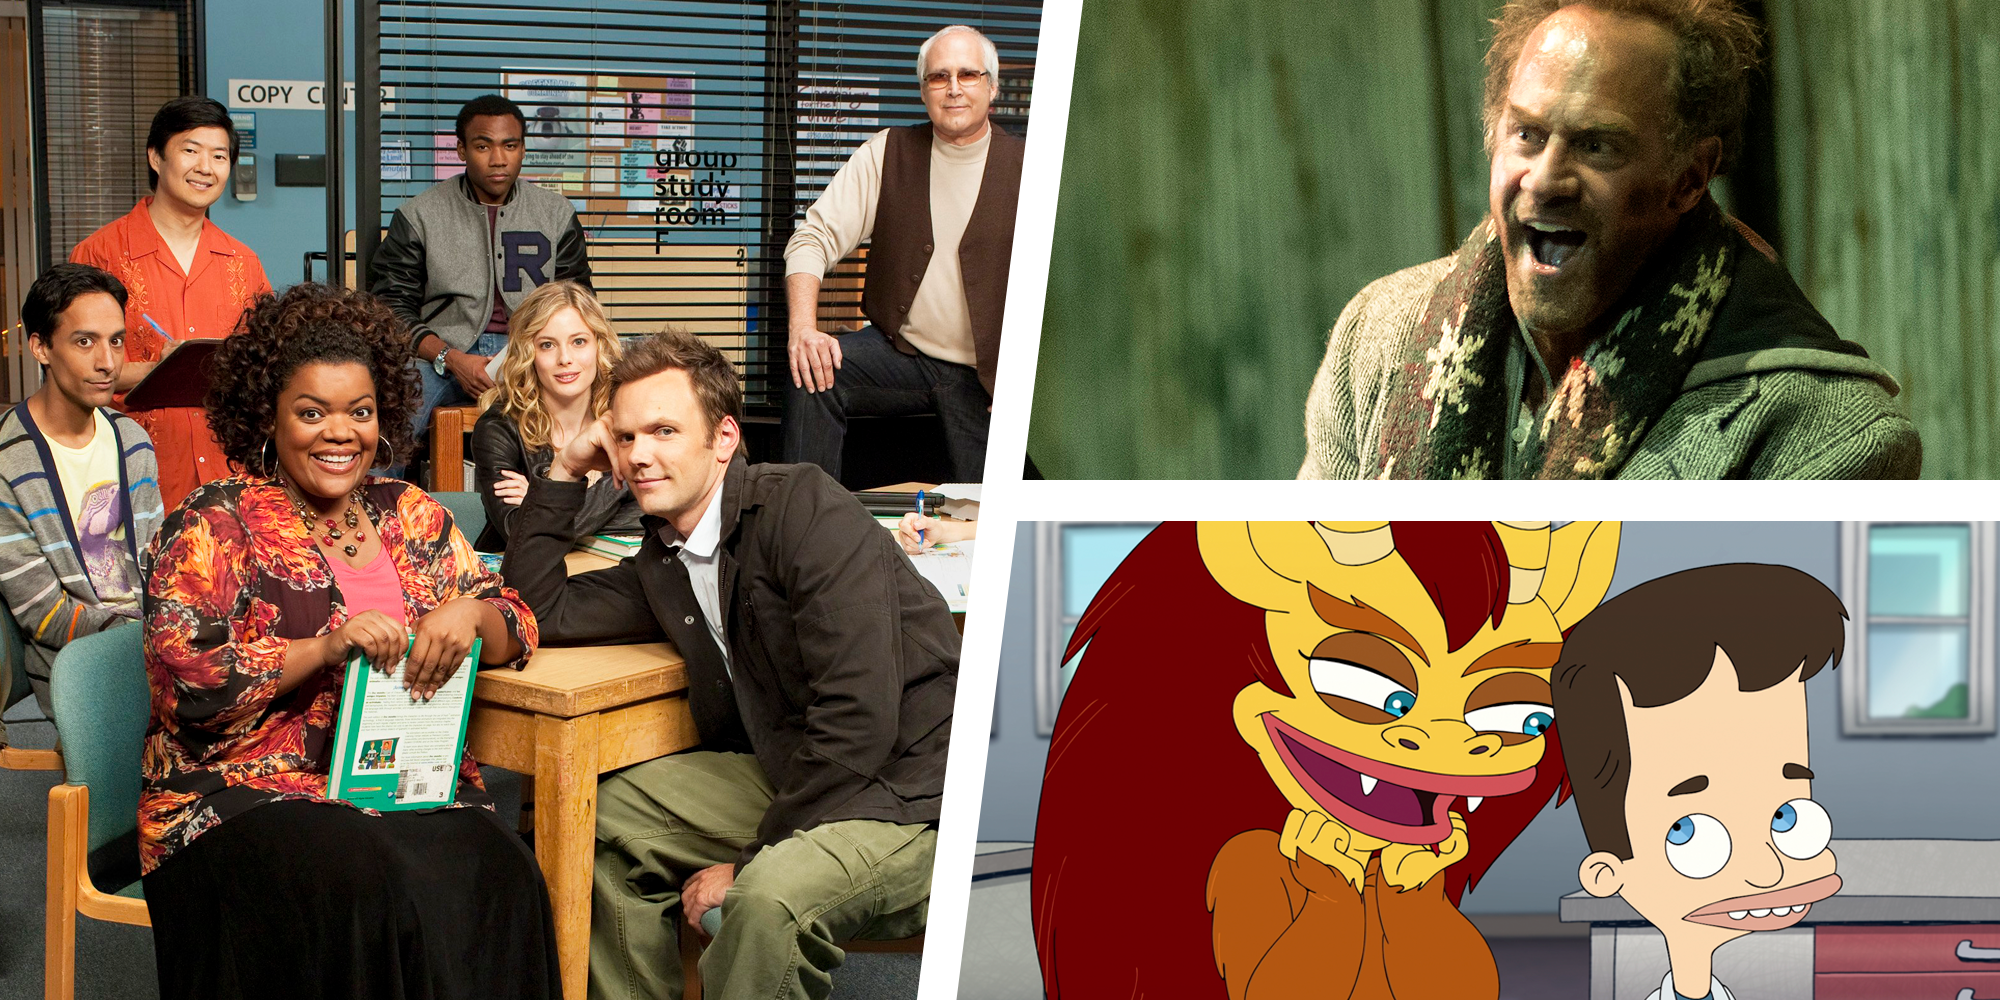 20 Funniest TV Shows on Netflix 2022 - Comedies Now Streaming